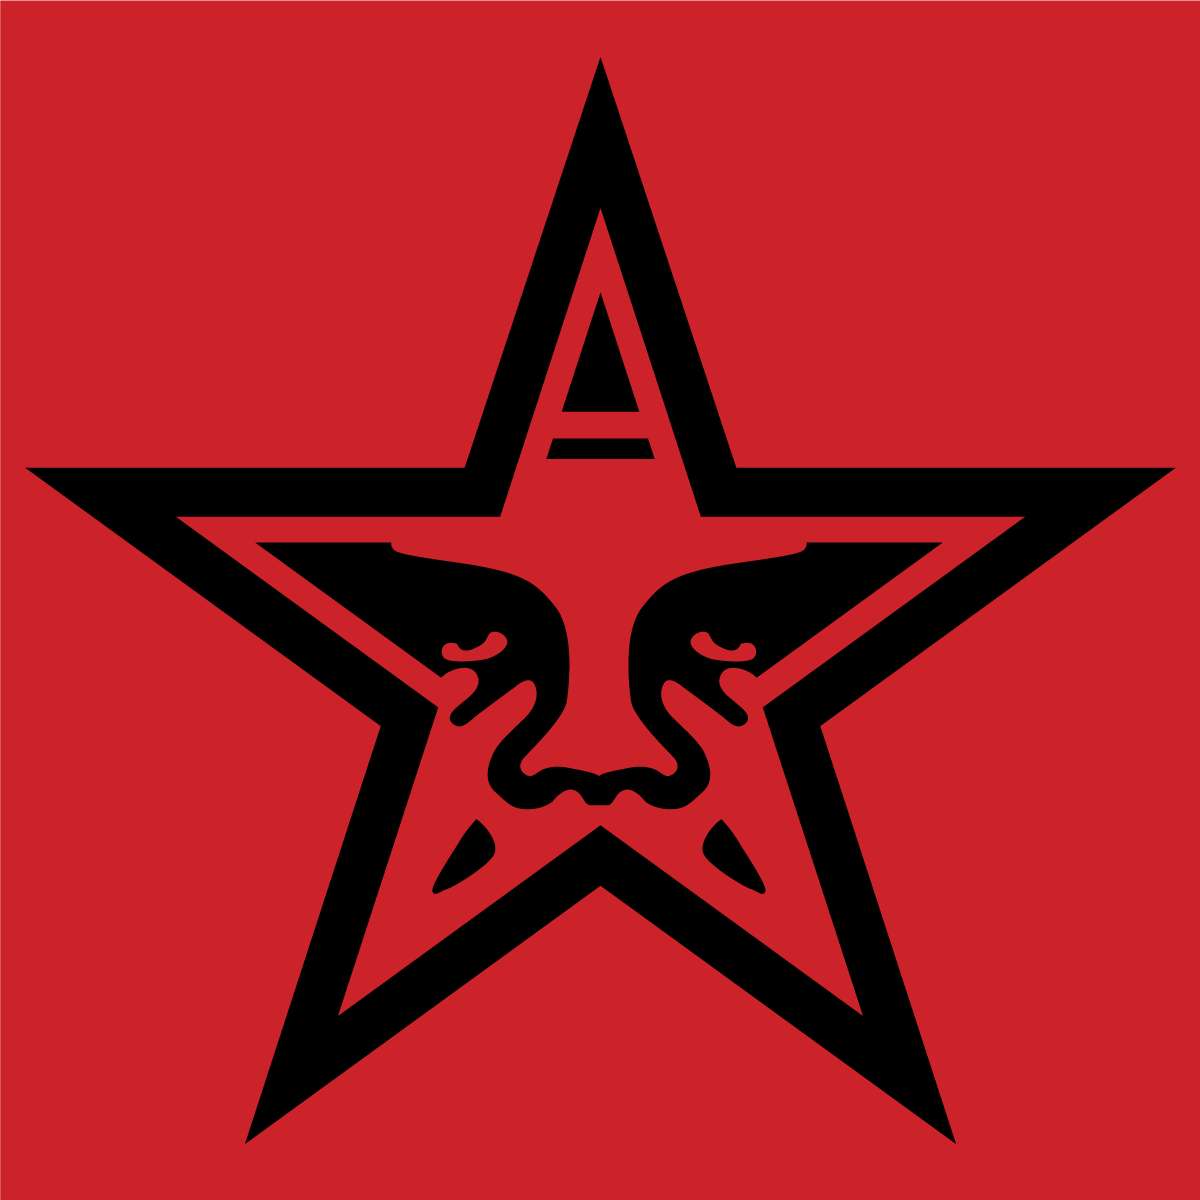 Obey Star Logo - Obey Giant Star Logo Red Background Vector | Free Vector Silhouette ...